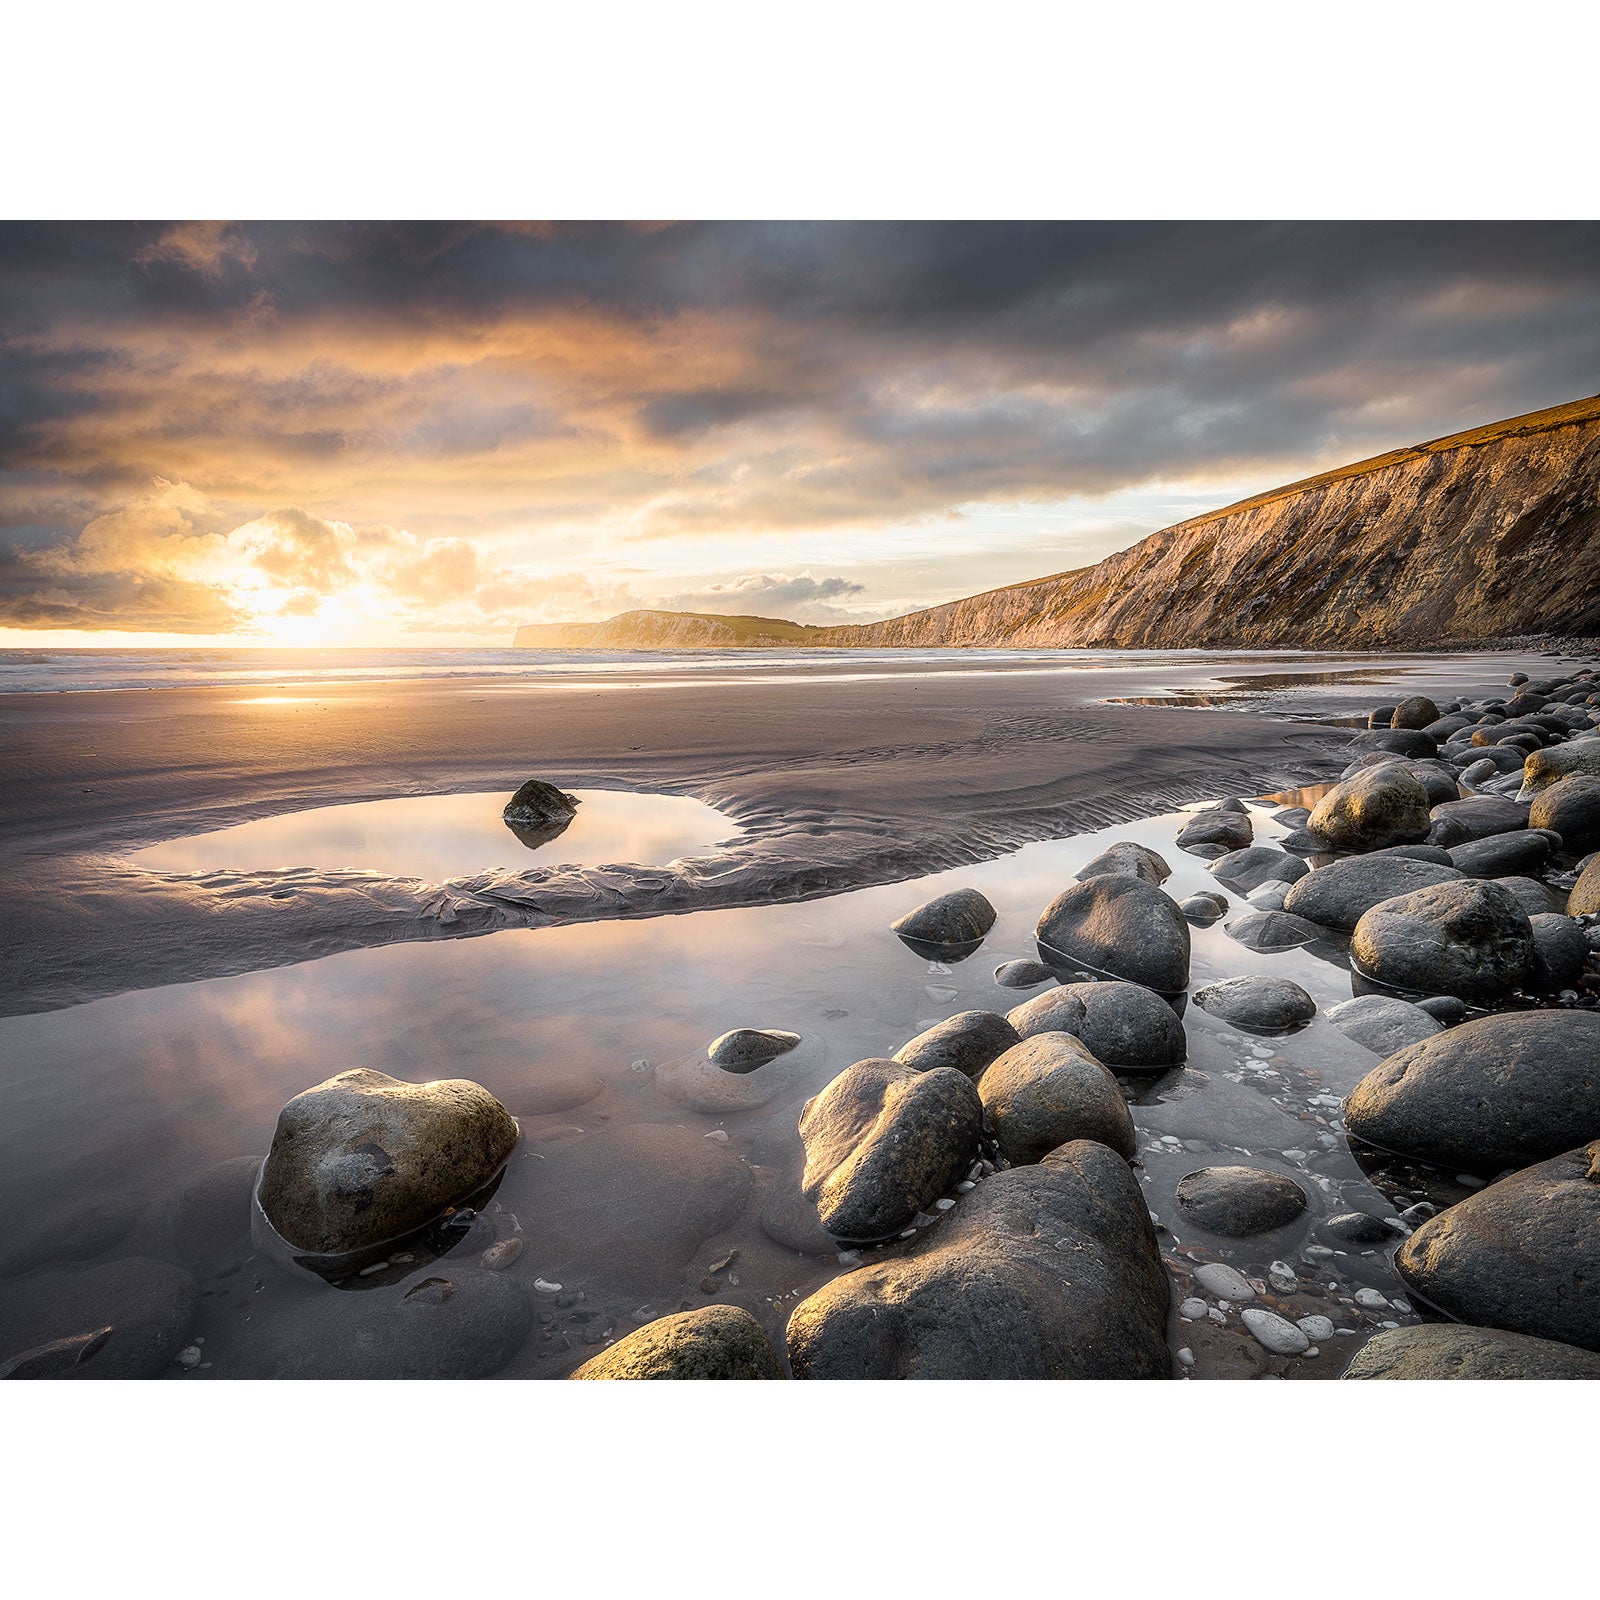 Sunset on Compton Bay with tide pools and a rocky shoreline on the Isle of Wight by Available Light Photography.